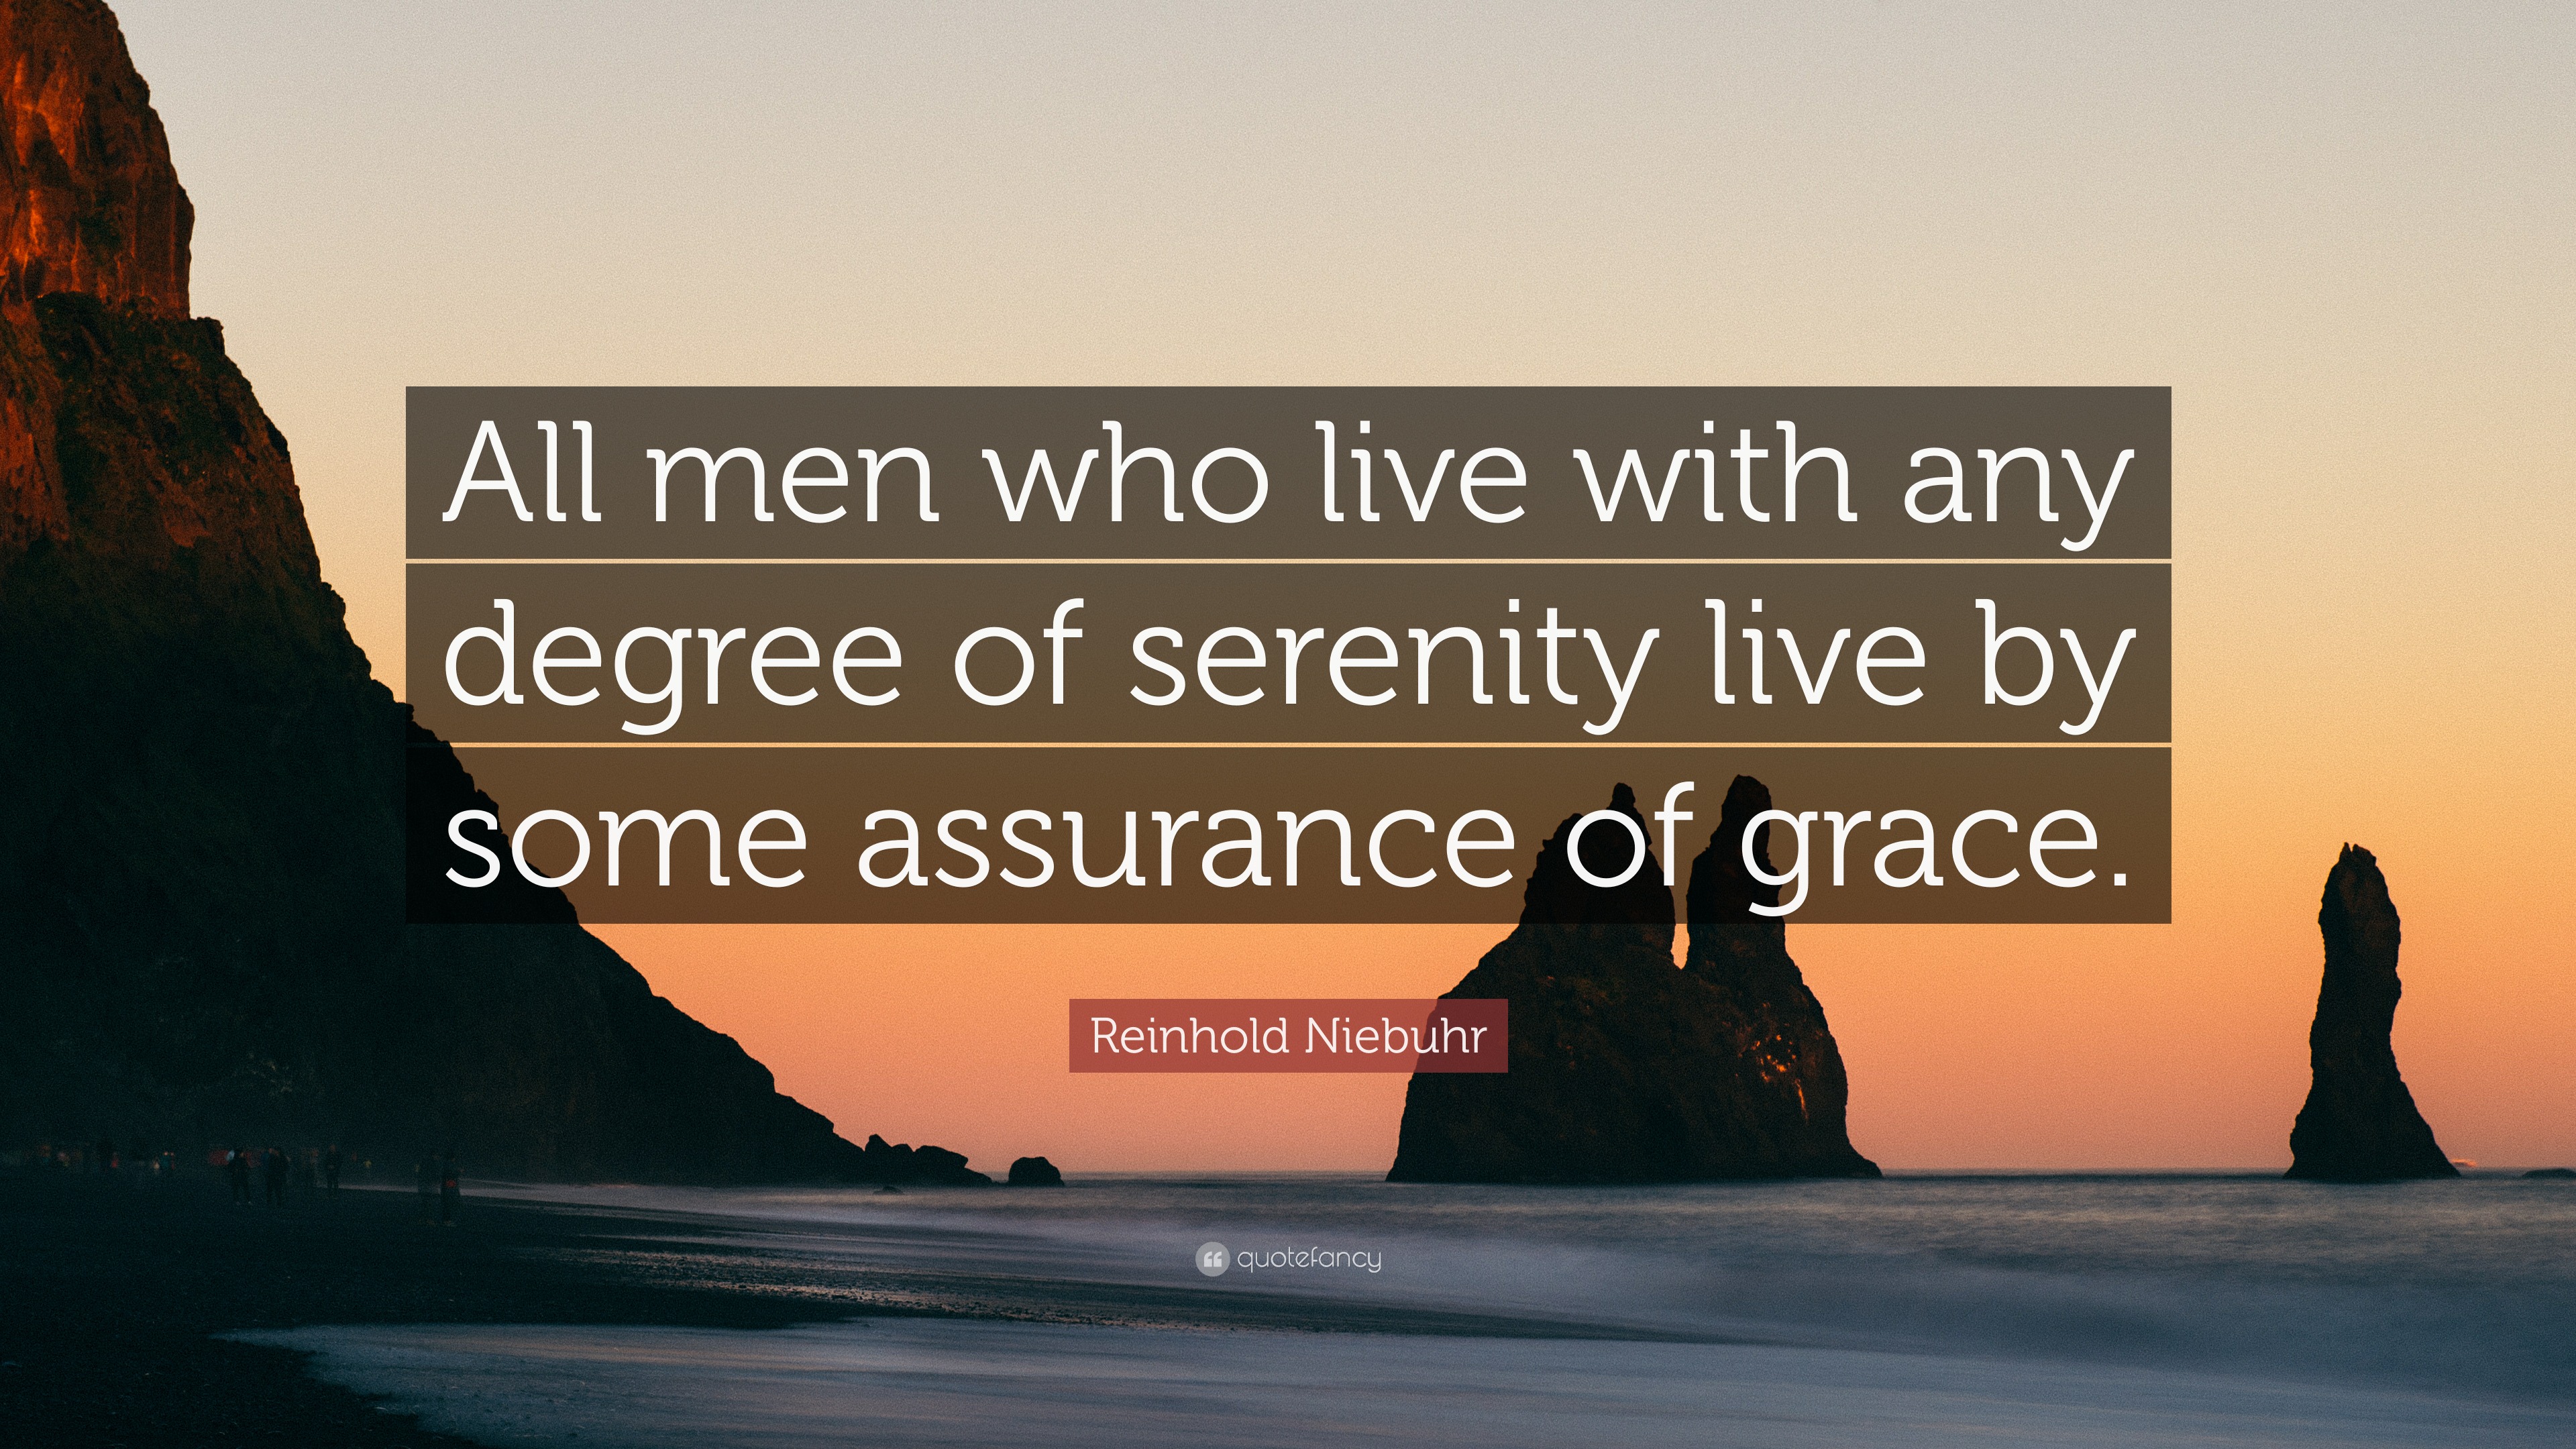 Reinhold Niebuhr Quote: “All men who live with any degree of